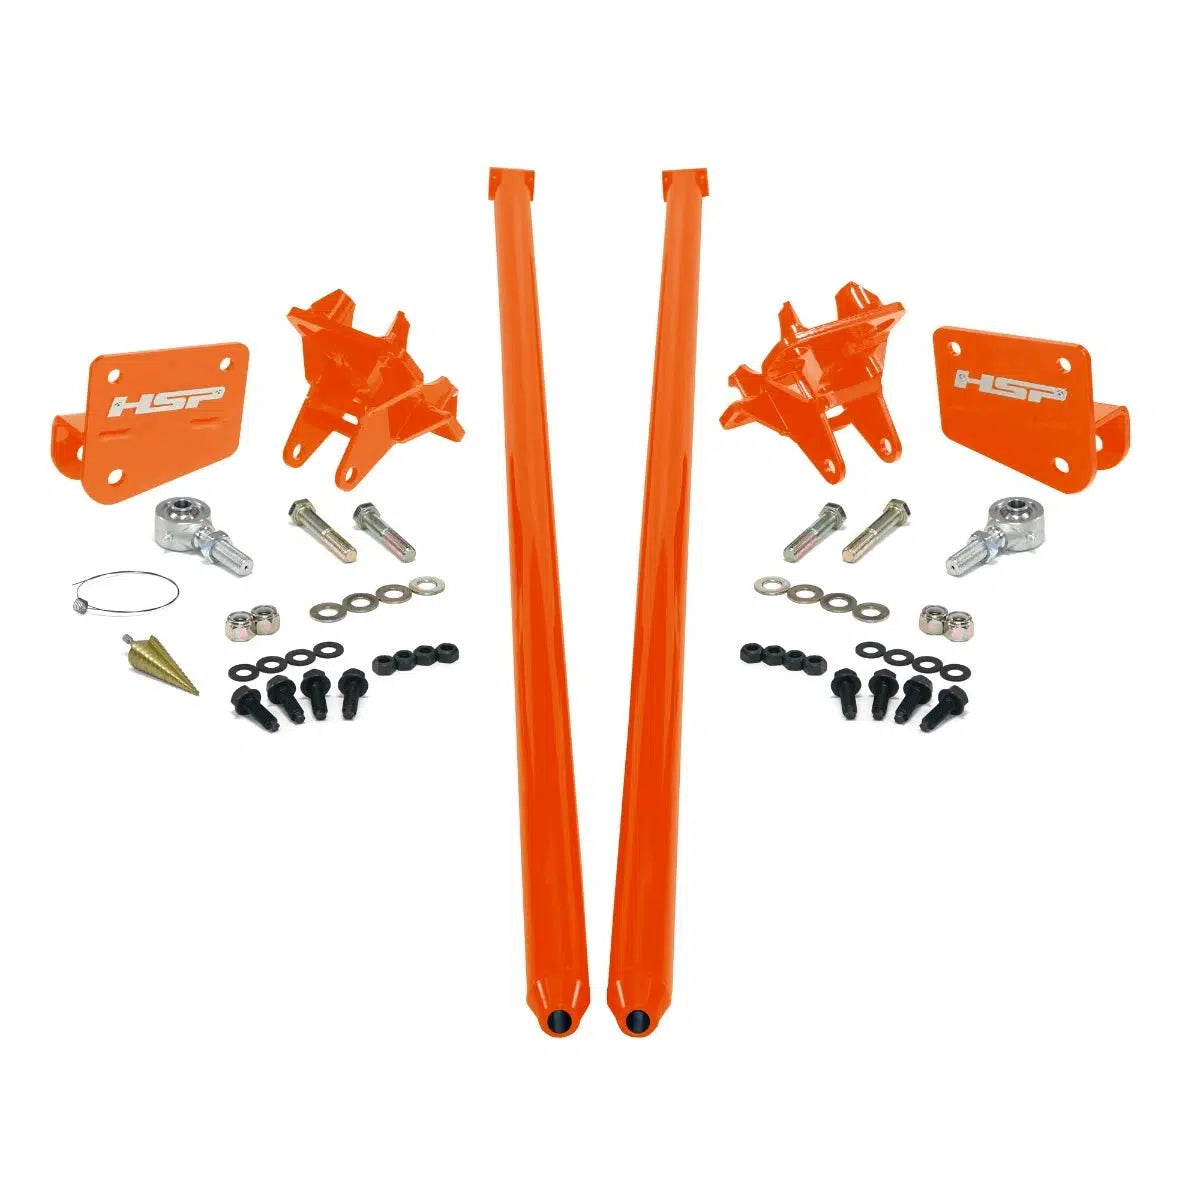 2011-2017 Powerstroke Traction Bars (ECLB,CCSB) (HSP-P-435-2-3-HSP)-Traction Bars-HSP Diesel-HSP-P-435-2-3-HSP-O-Dirty Diesel Customs